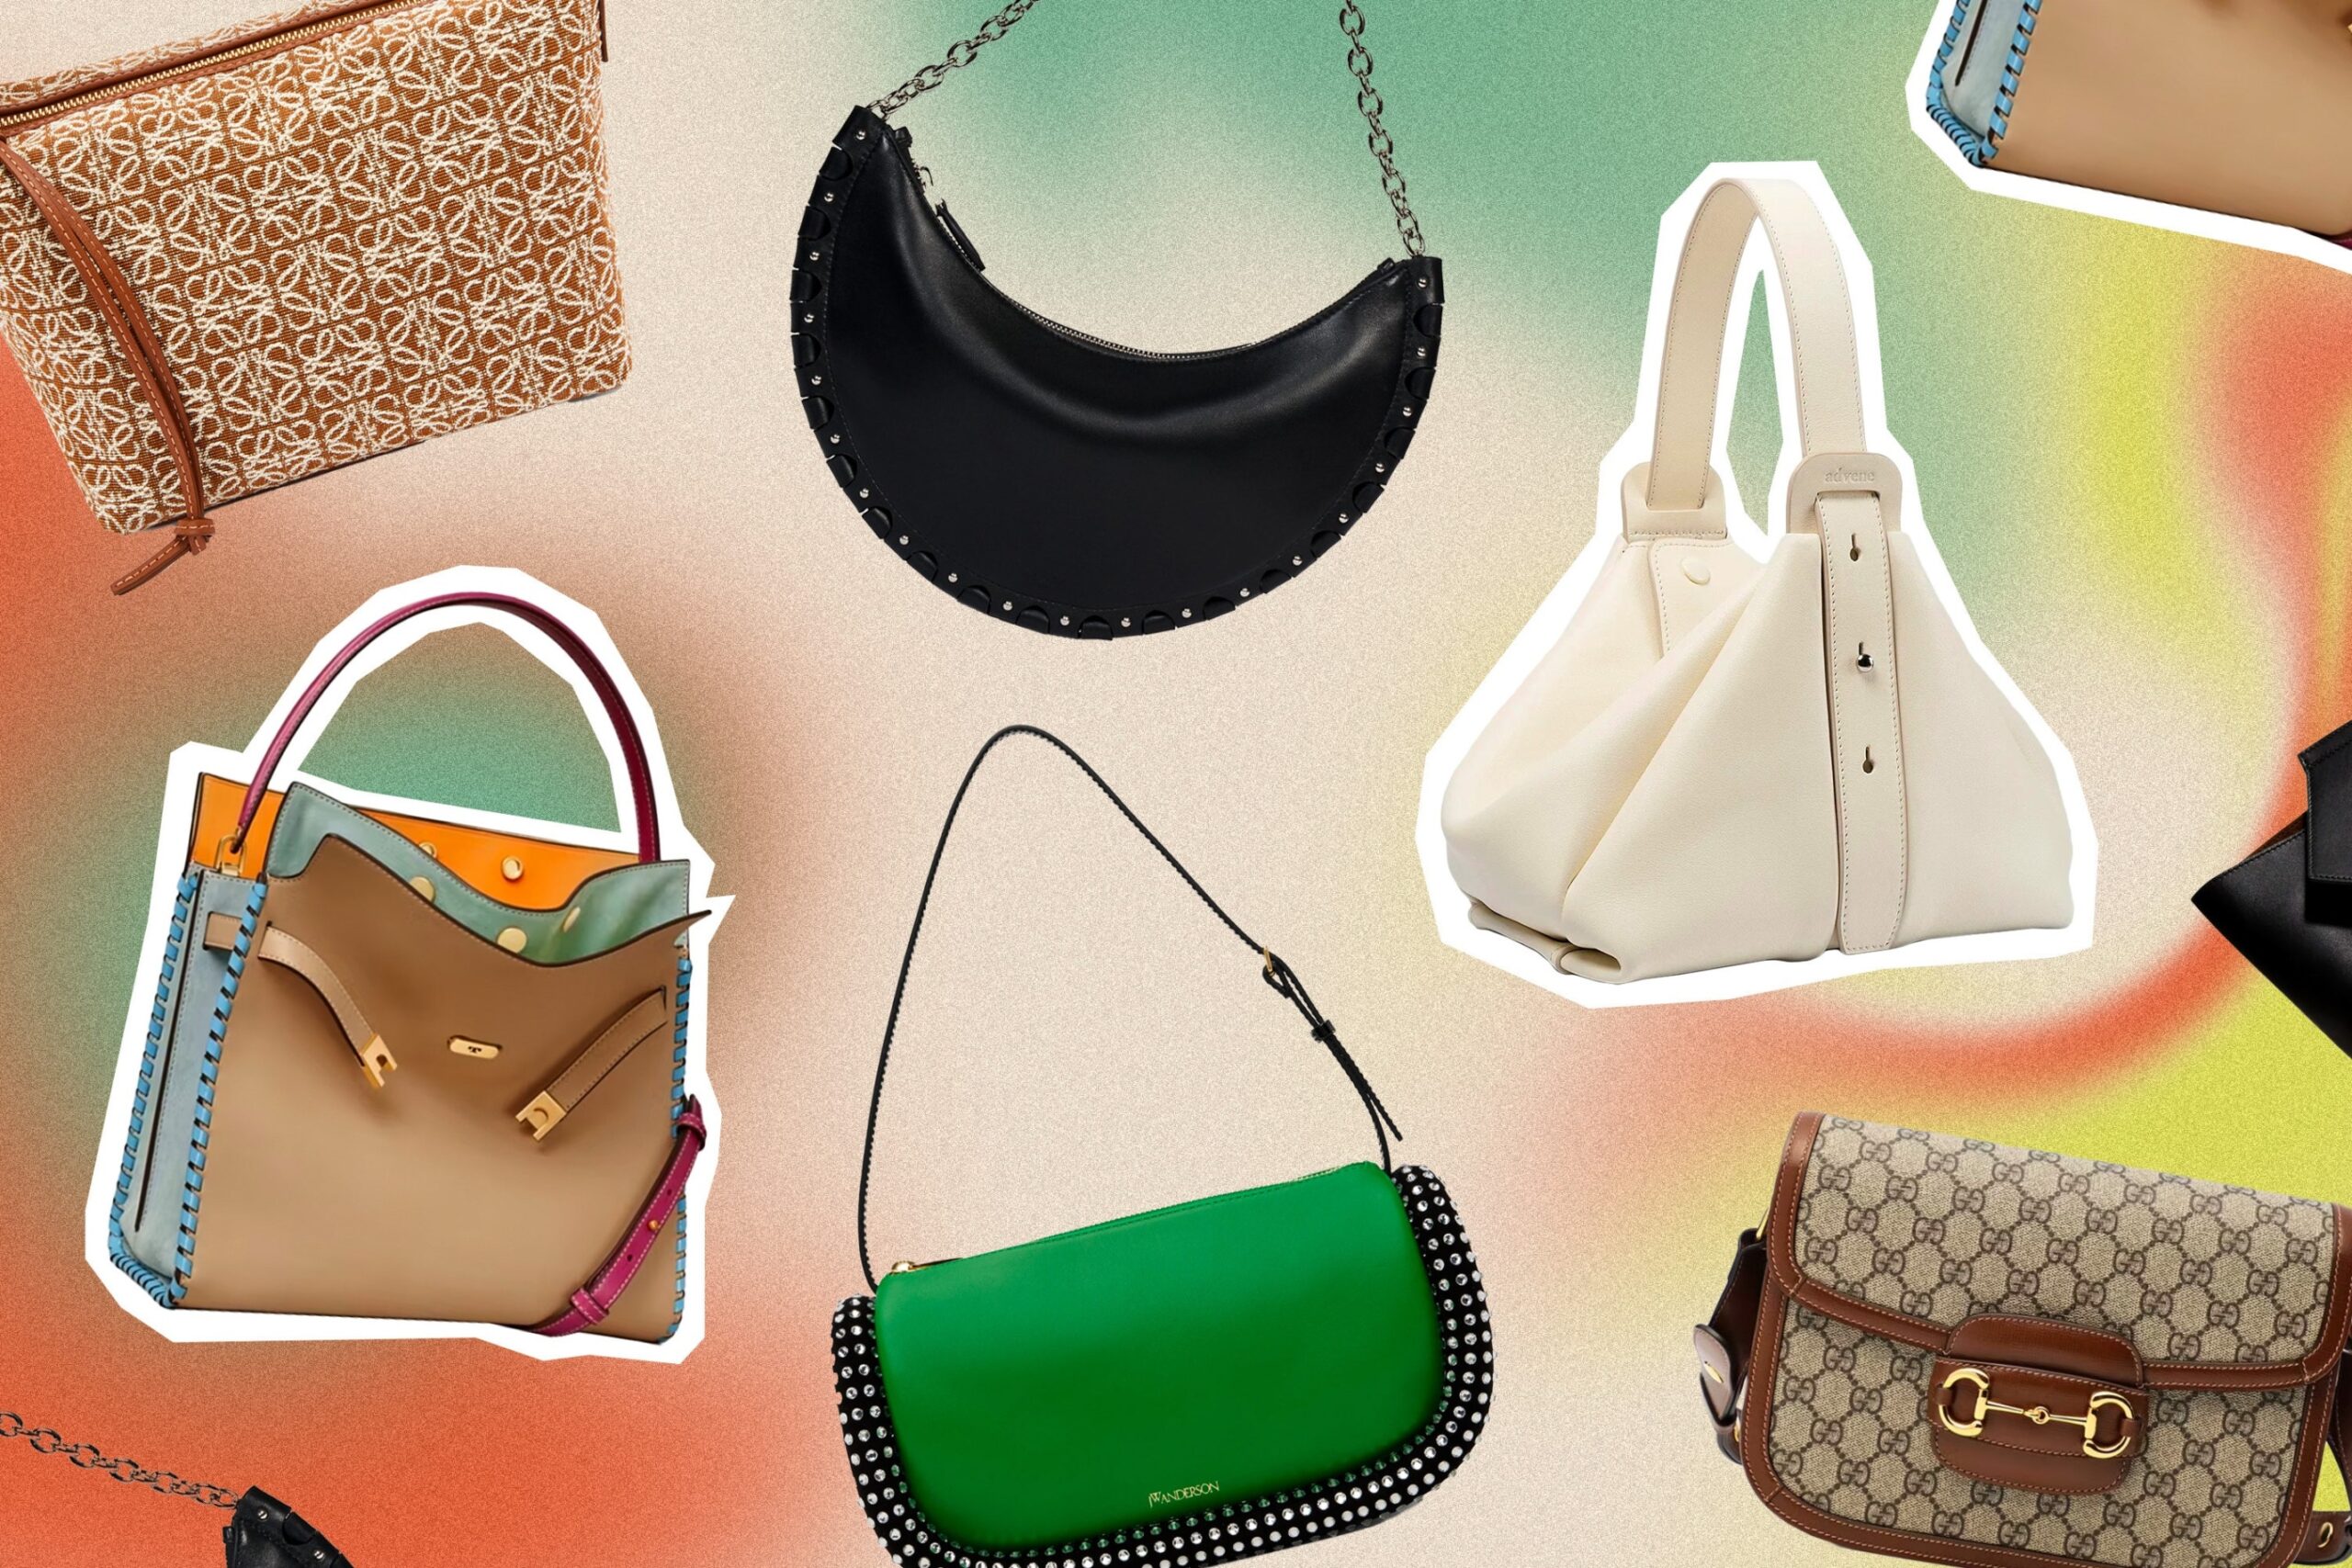 authentic designer bags Bulan 4  Best Designer Bags, According to Fashion Experts   Glamour